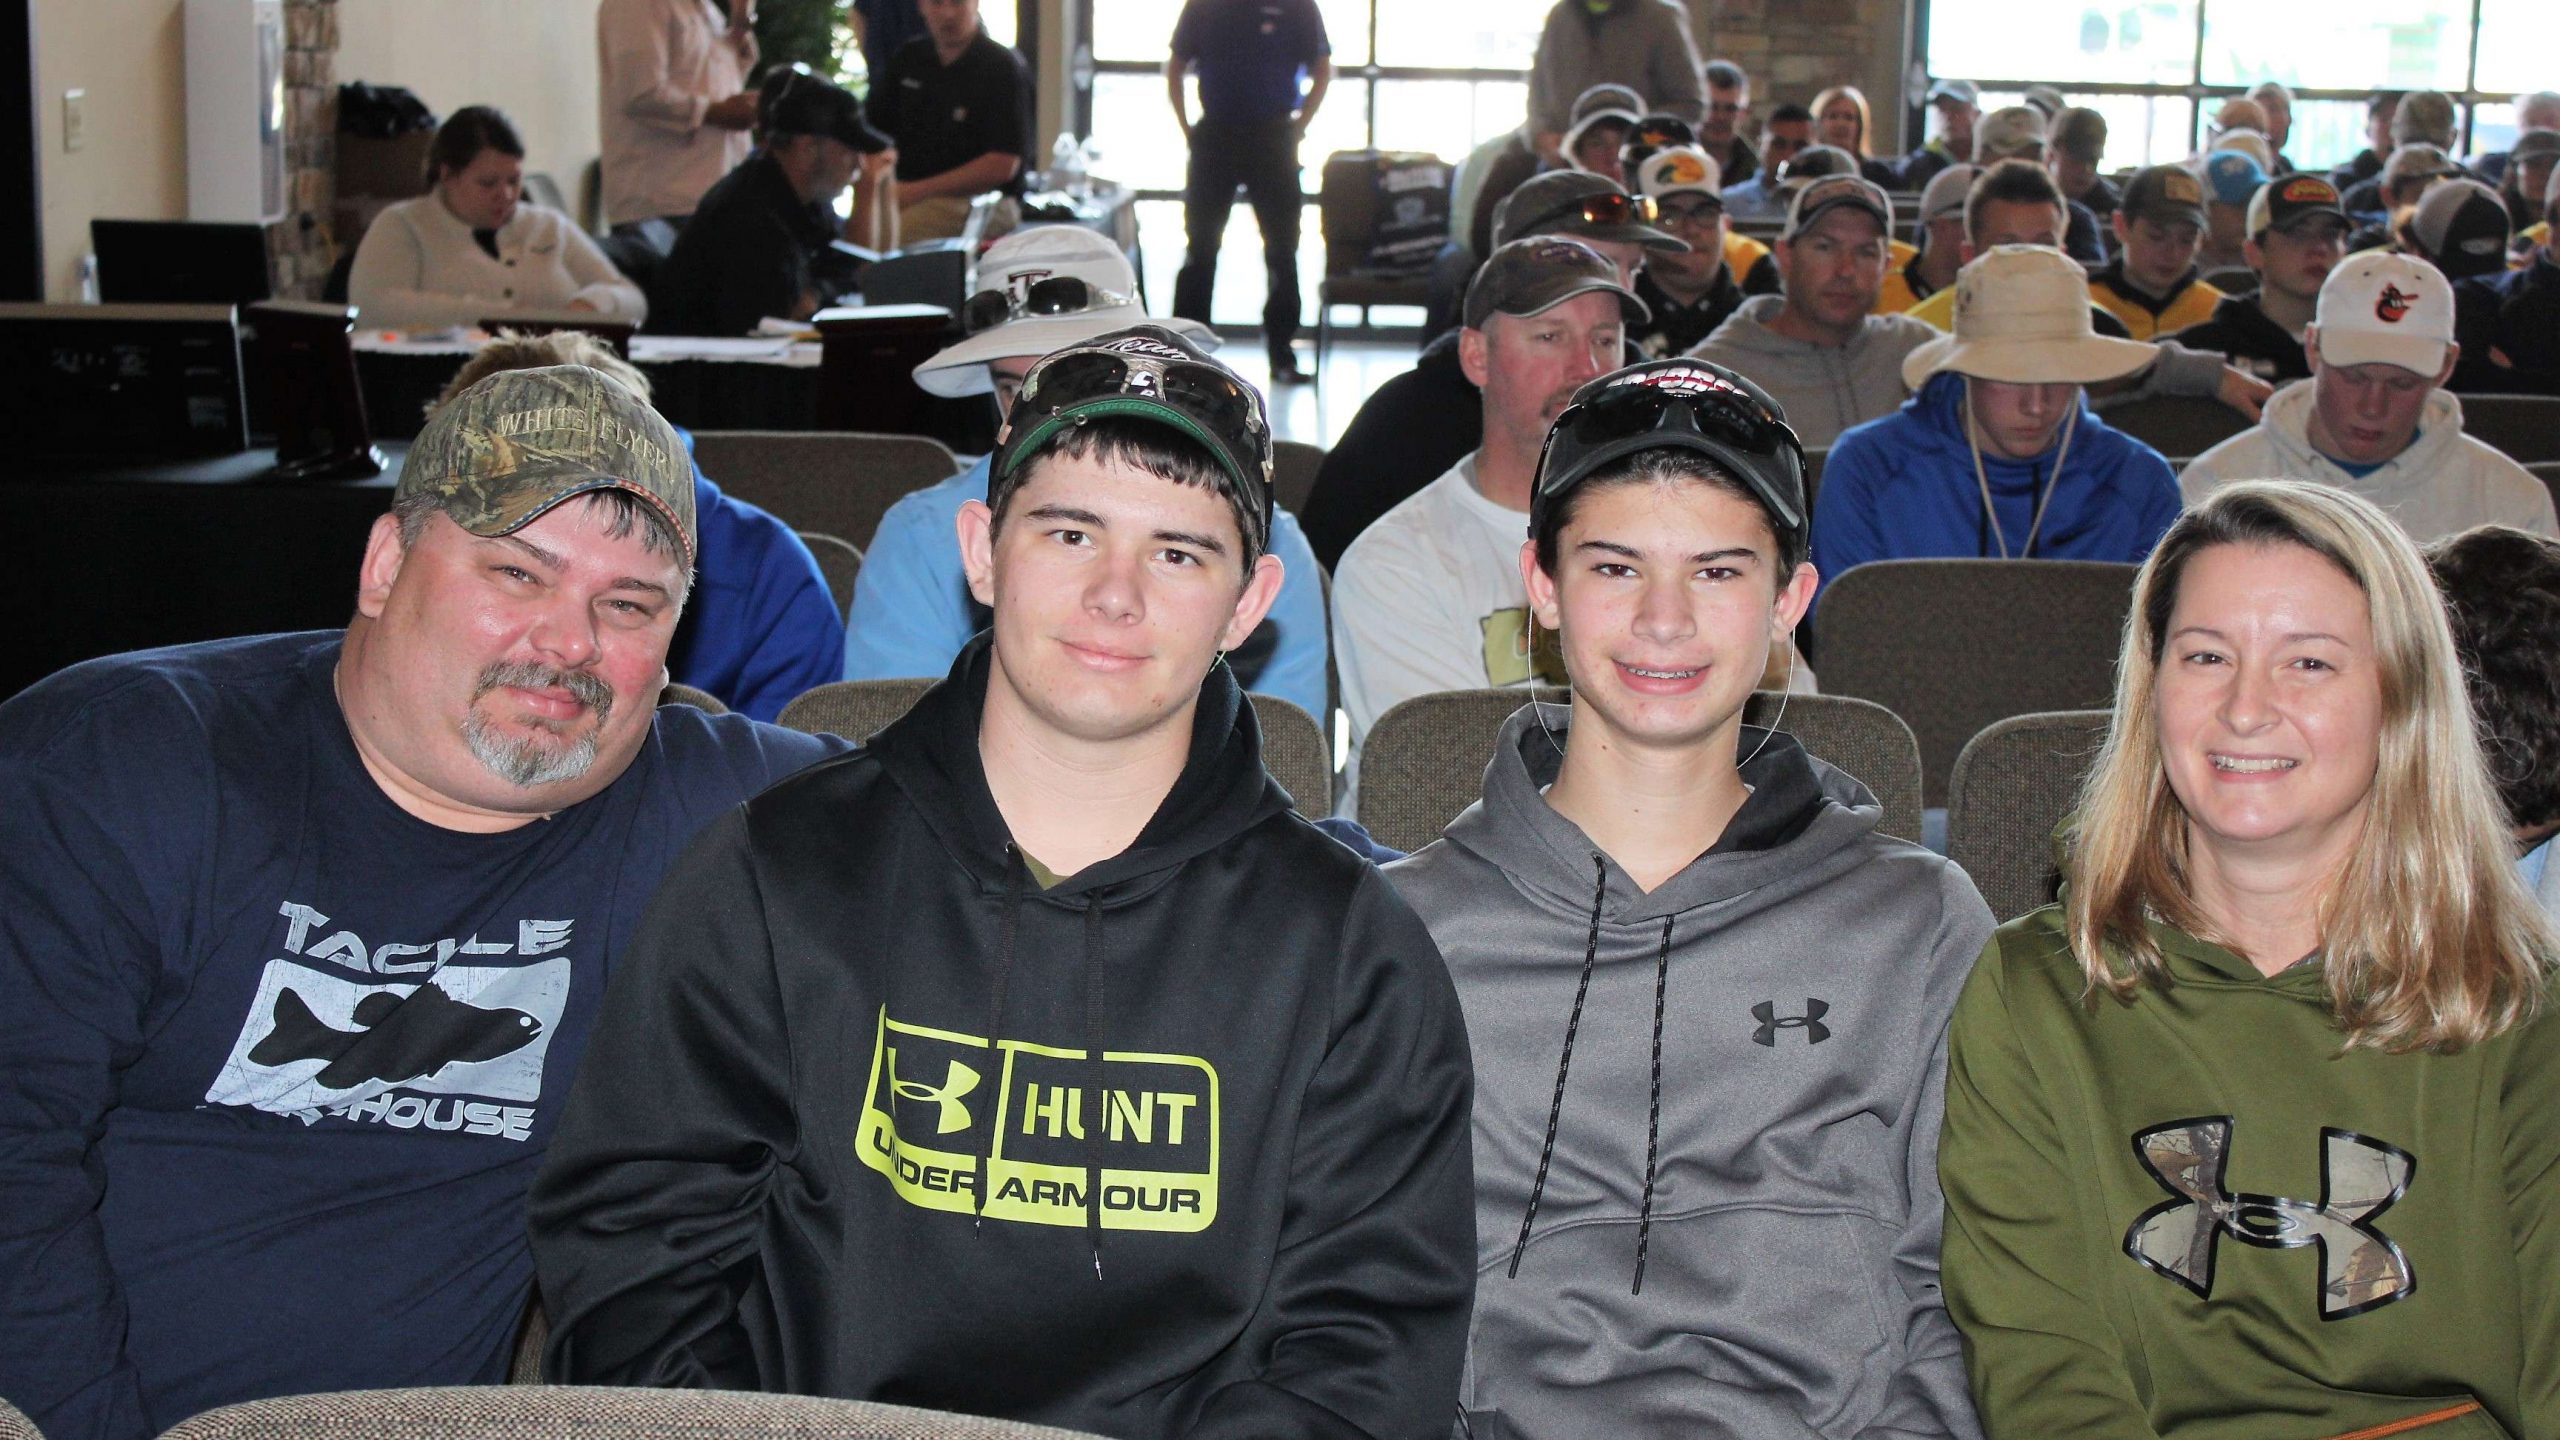 Here from the McGivney Bass Club in Illinois are anglers Ethan and Blake Jones. They are flanked by their dad Jeff, at left, and mom Tia at right. 